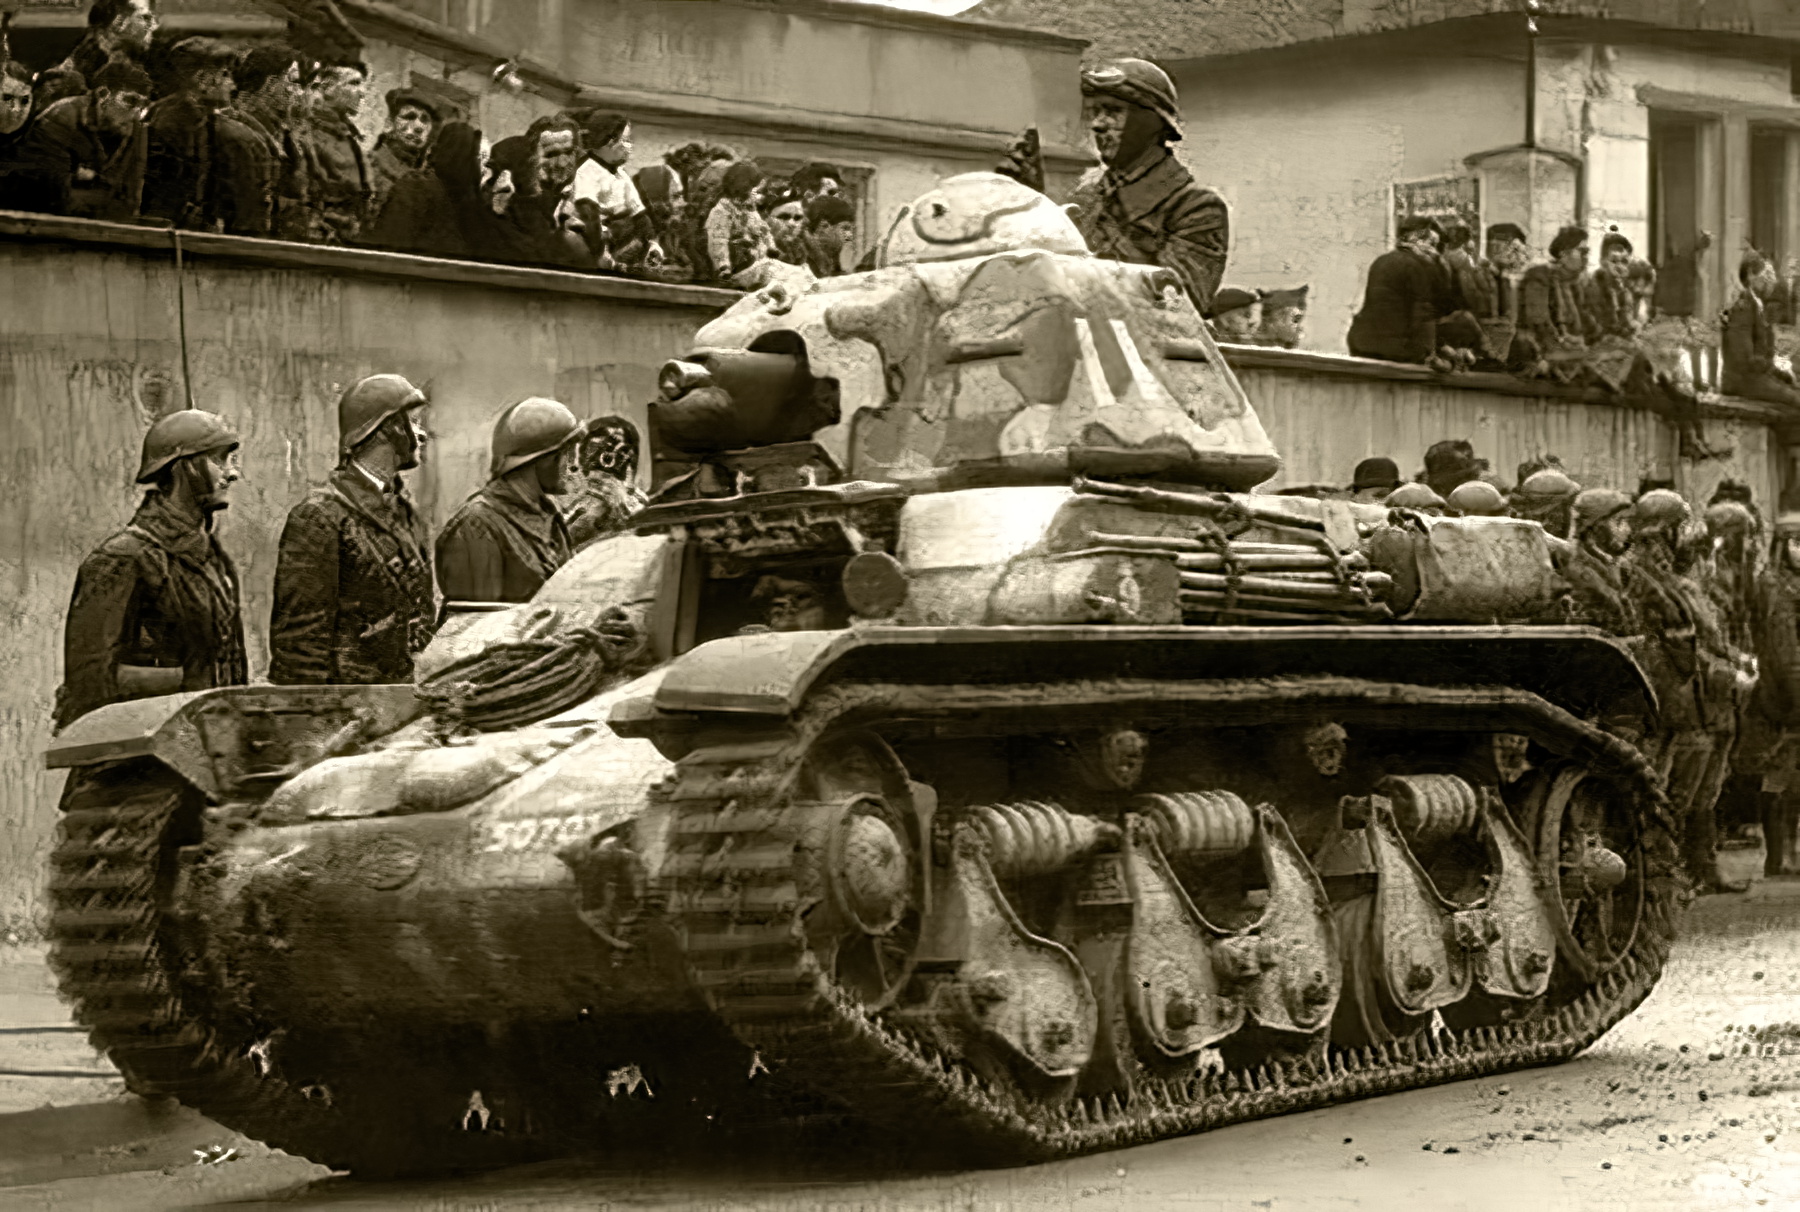 https://www.asisbiz.com/Battles/BOF/images/French-Army-Renault-R35-support-tank-military-parade-France-1940-web-01.jpg